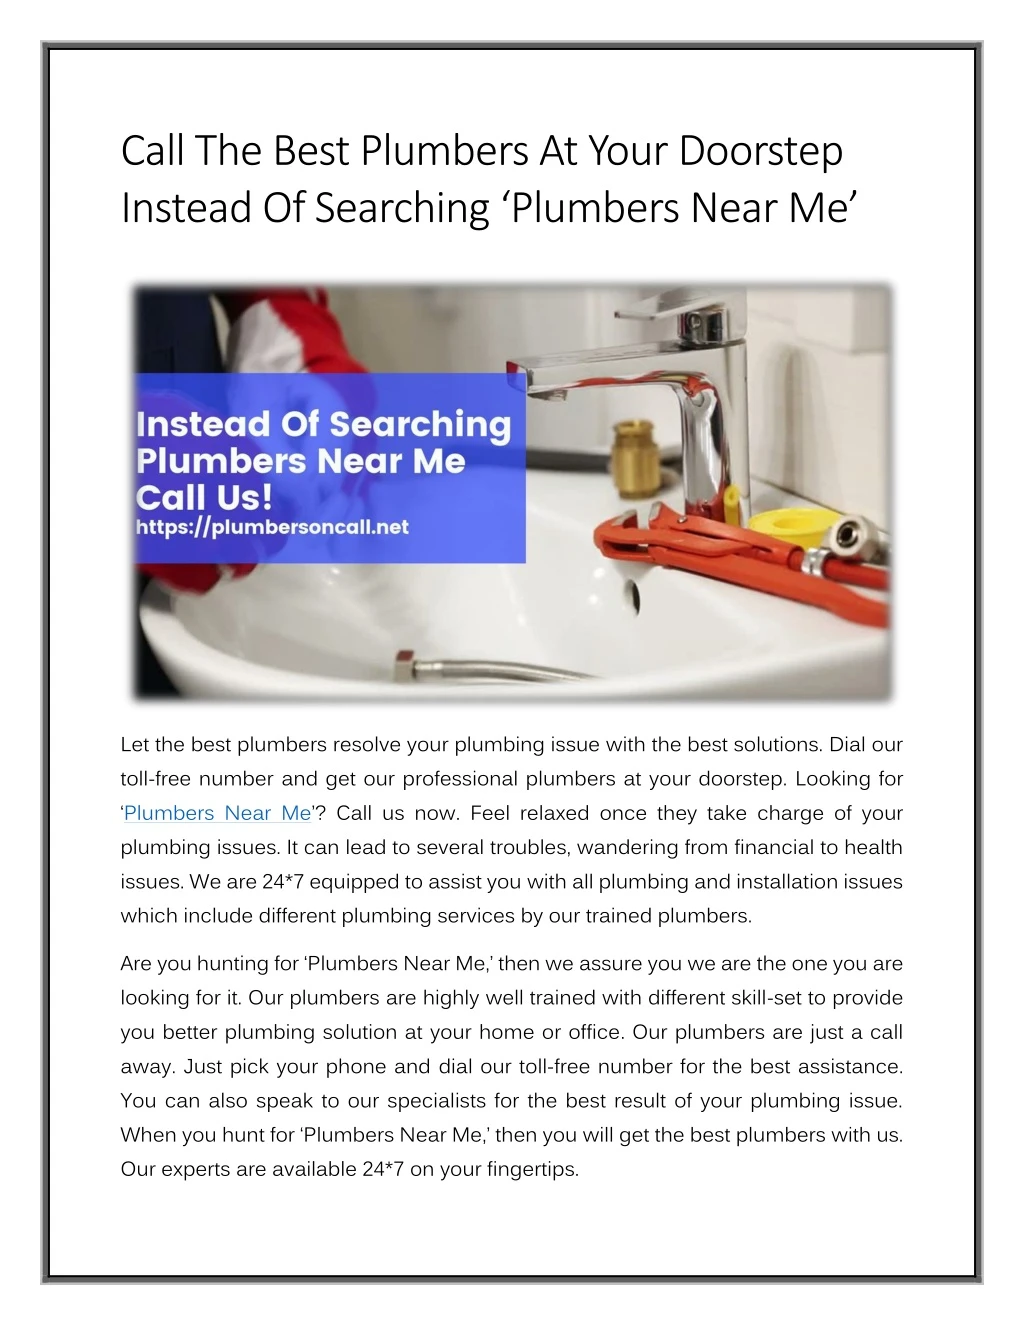 call the best plumbers at your doorstep instead